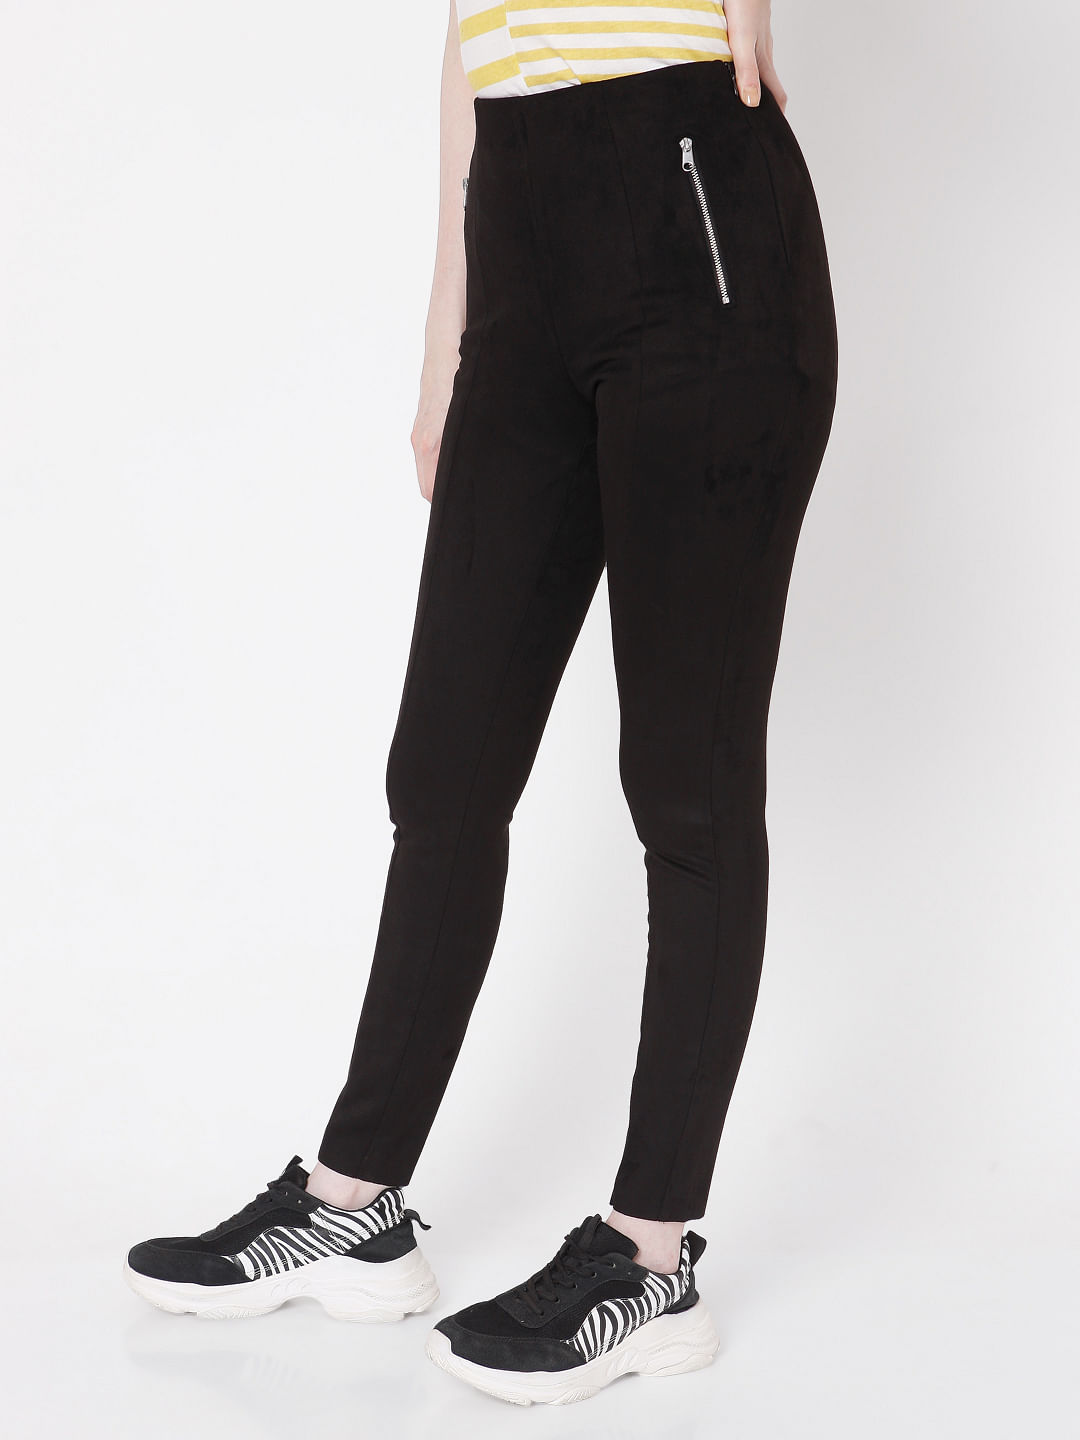 Black Zip Up High Waisted Leggings | Dressed in Lucy